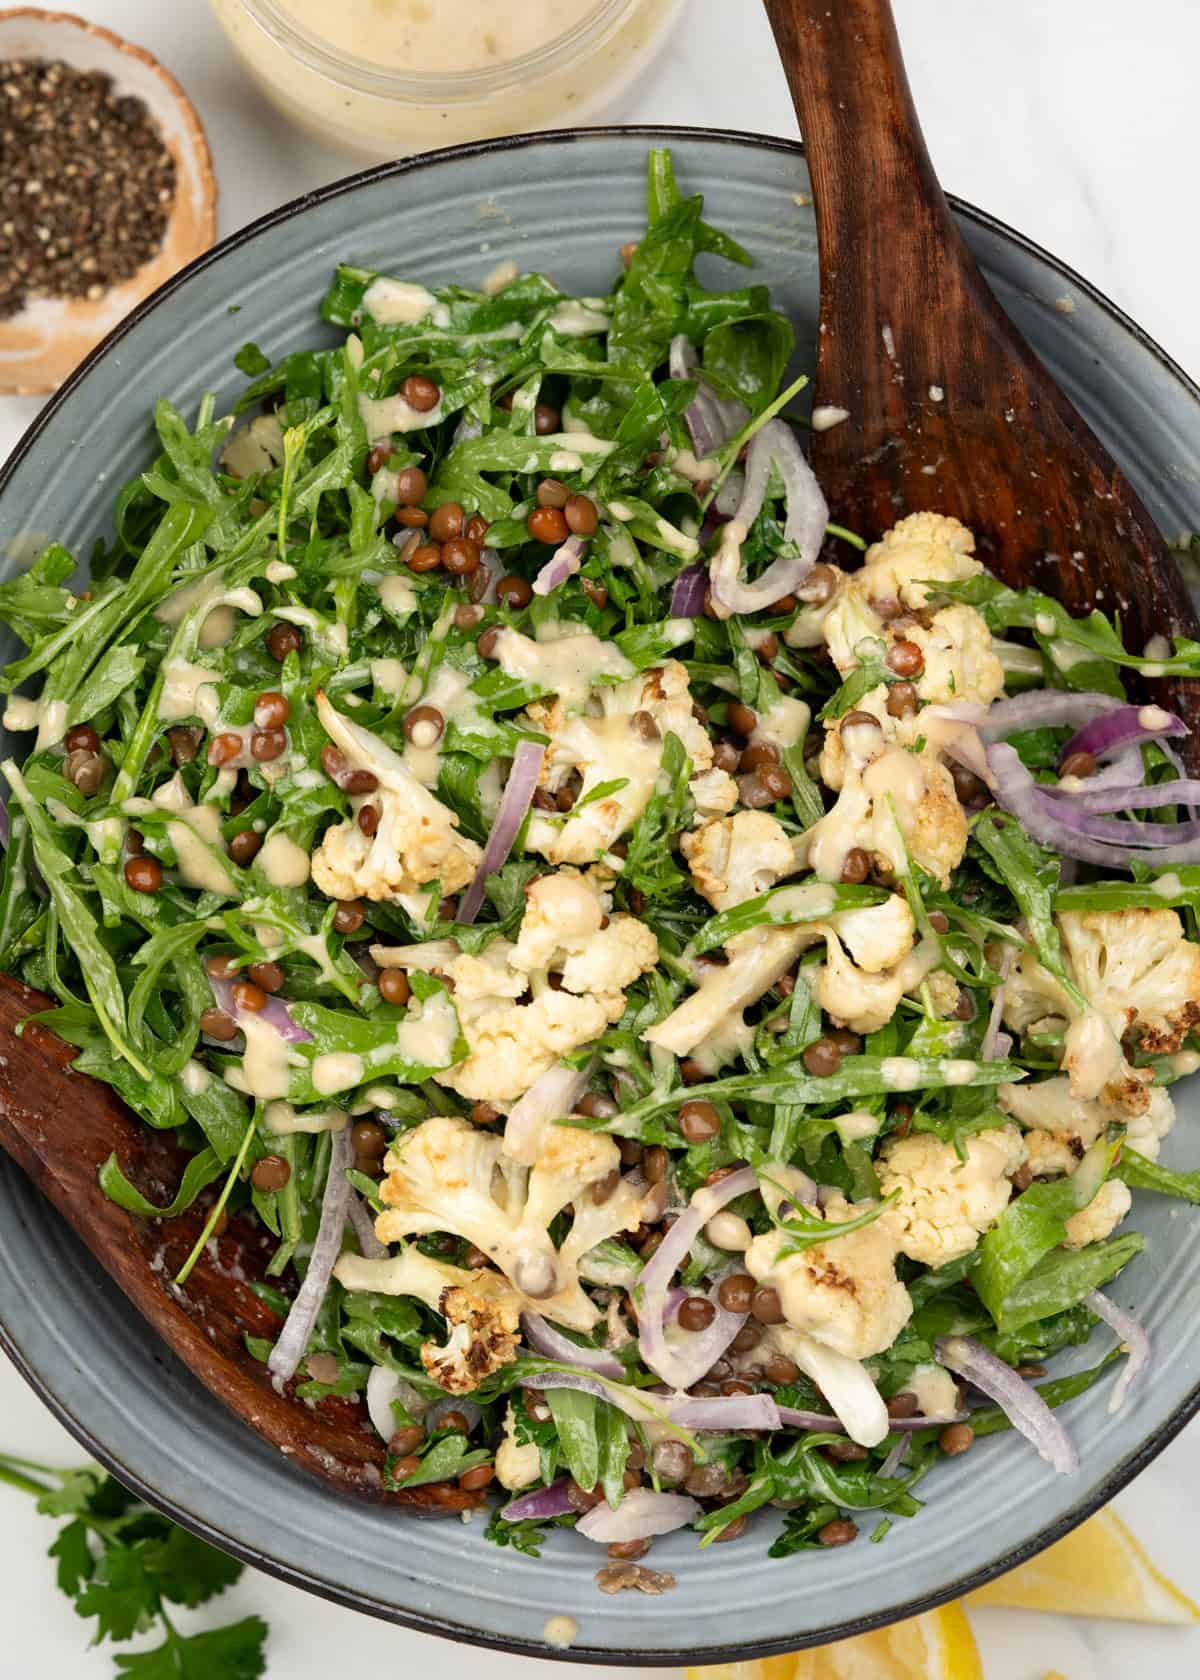 Roasted cauliflower salad with lentils, drizzled with tahini dressing